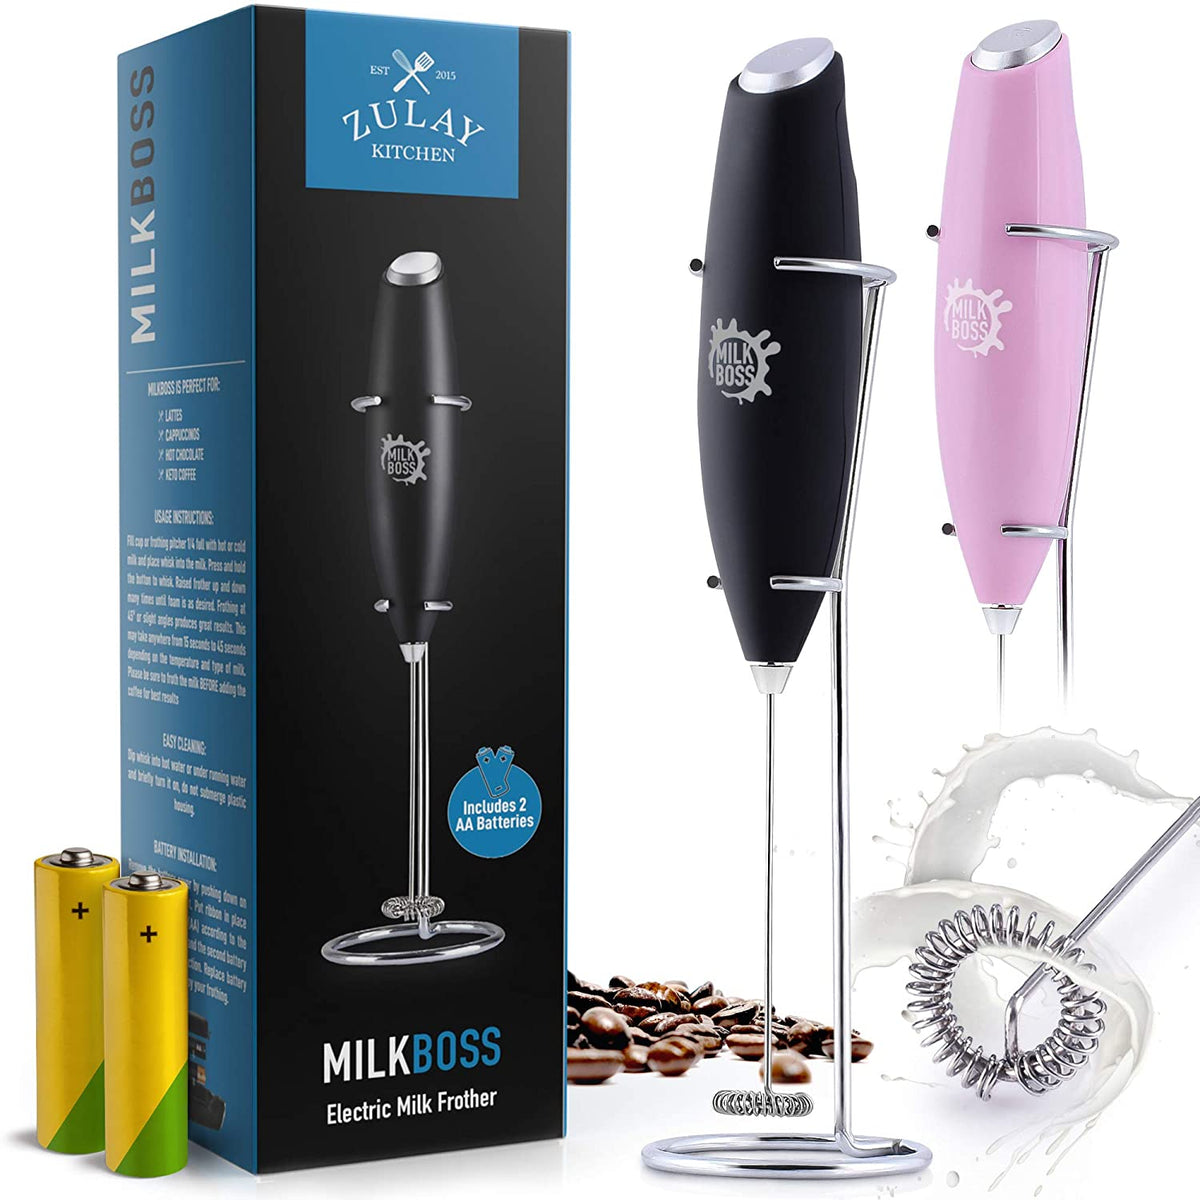 Zulay Kitchen MILK BOSS Milk Frother With Stand - Exec White with